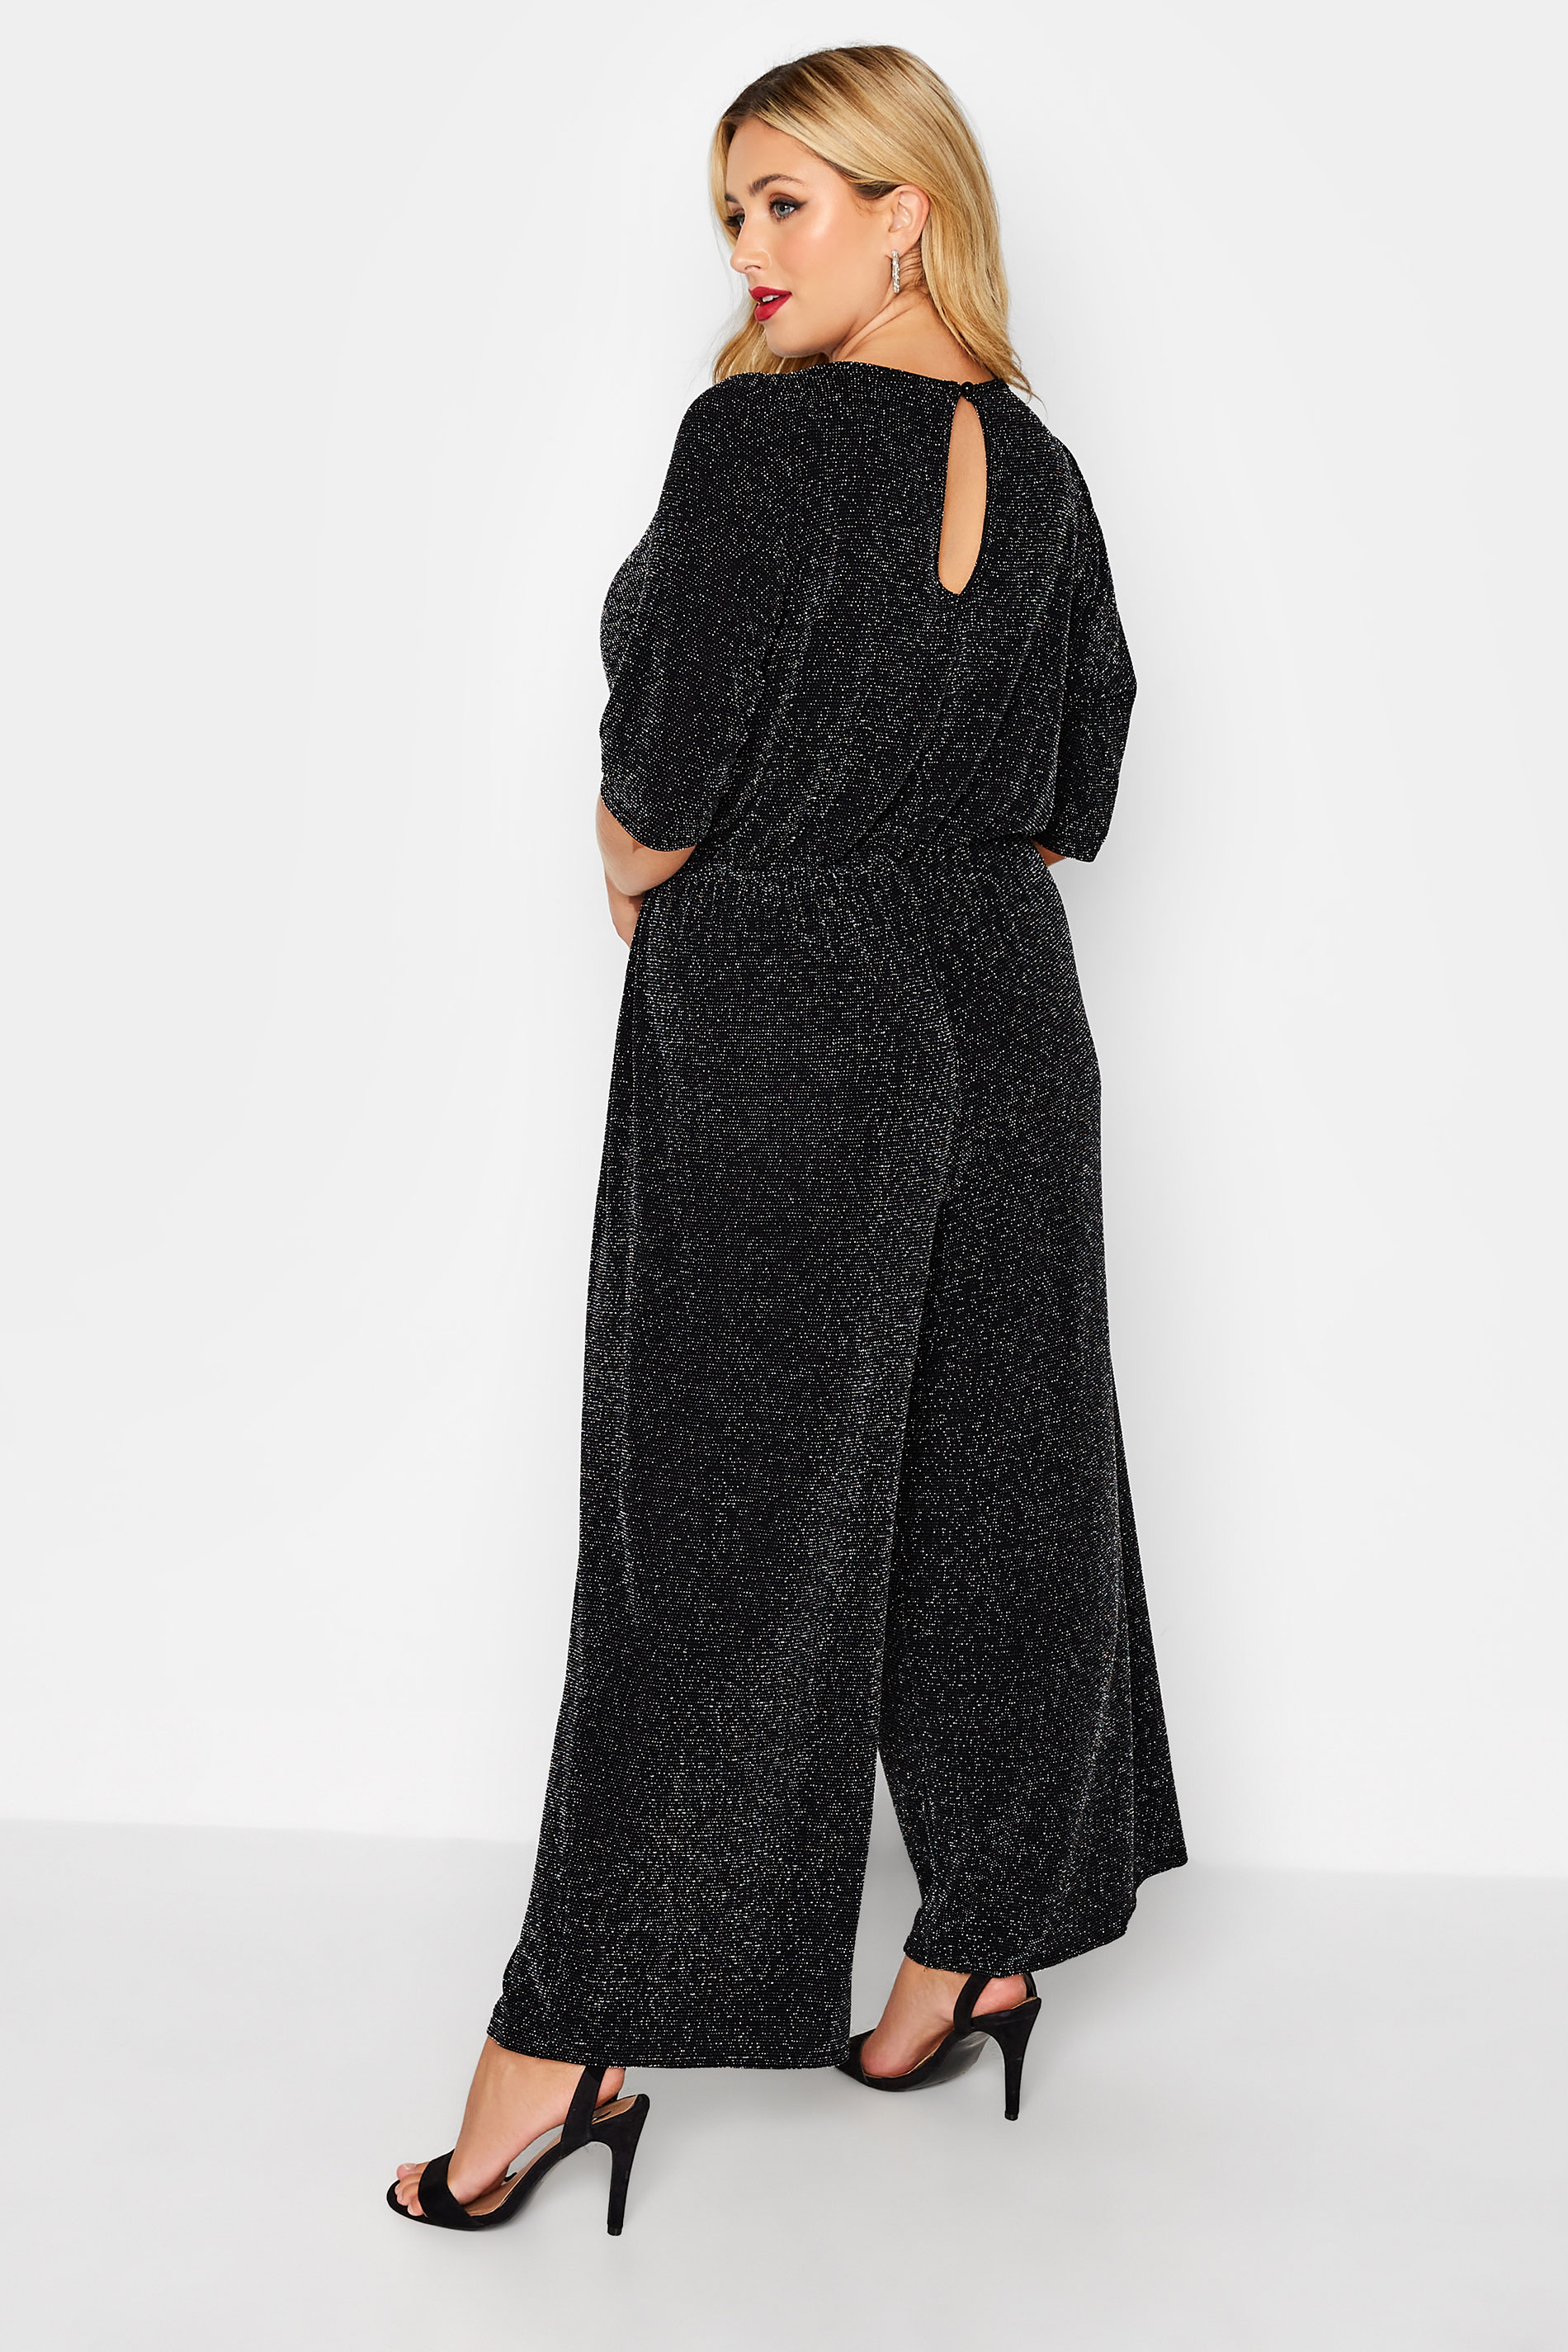 LIMITED COLLECTION Plus Size Black & Silver Glitter Stretch Wrap Jumpsuit | Yours Clothing 3